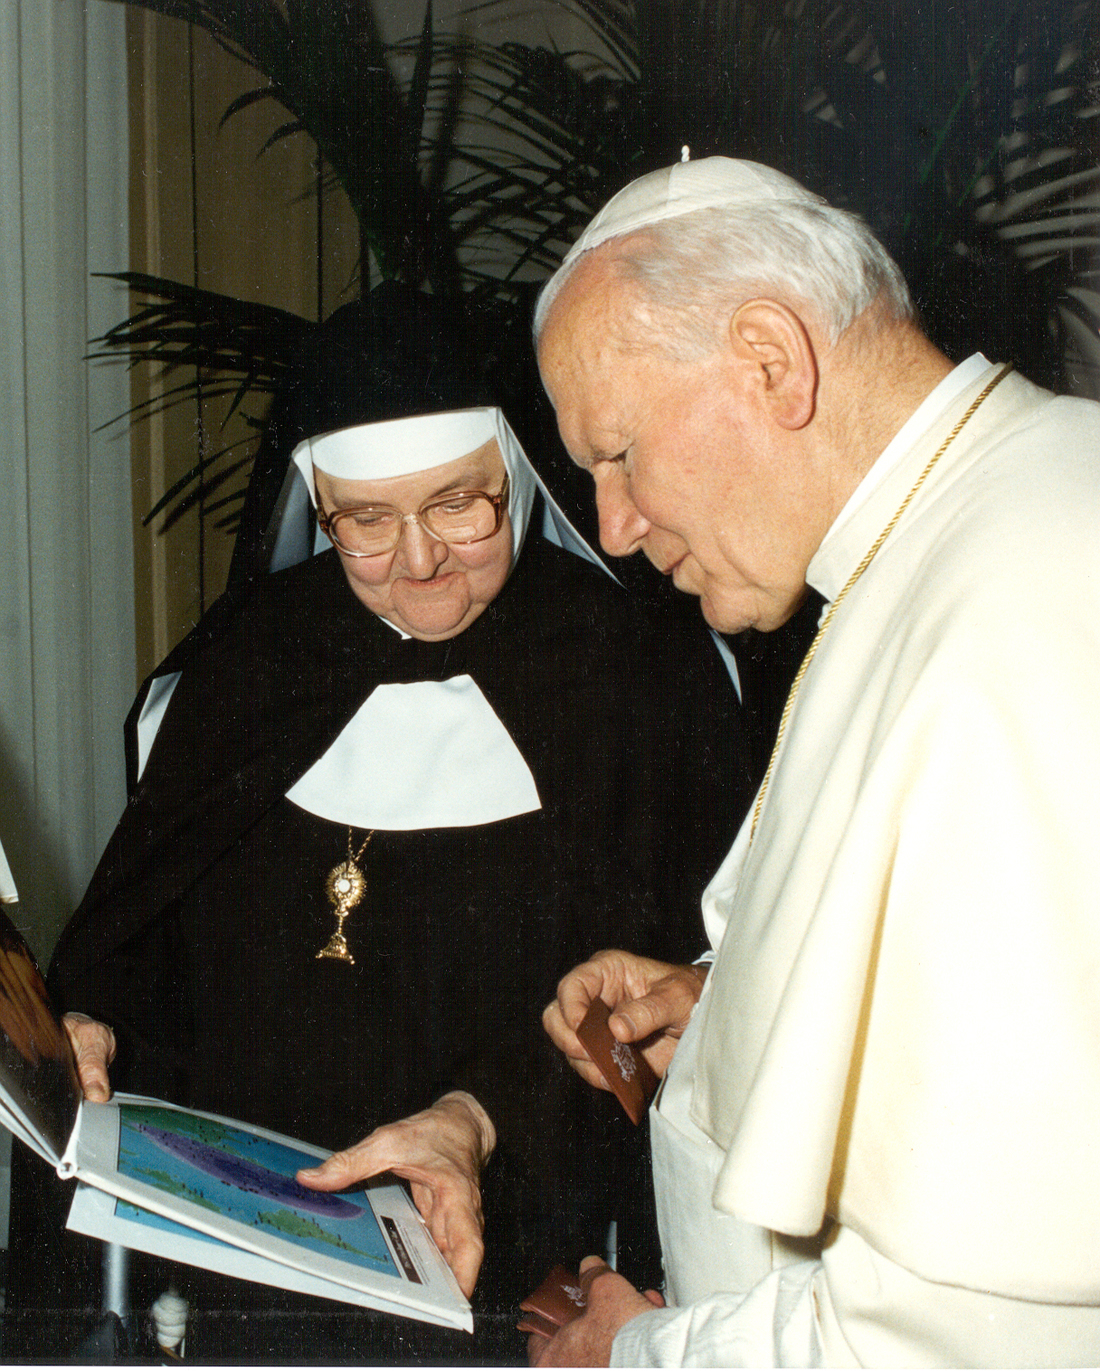 During a May 1,1996 audience in Rome with Pope John Paul II, EWTN Foundress Mother Angelica shared plans for the Network’s international expansion with the future saint.